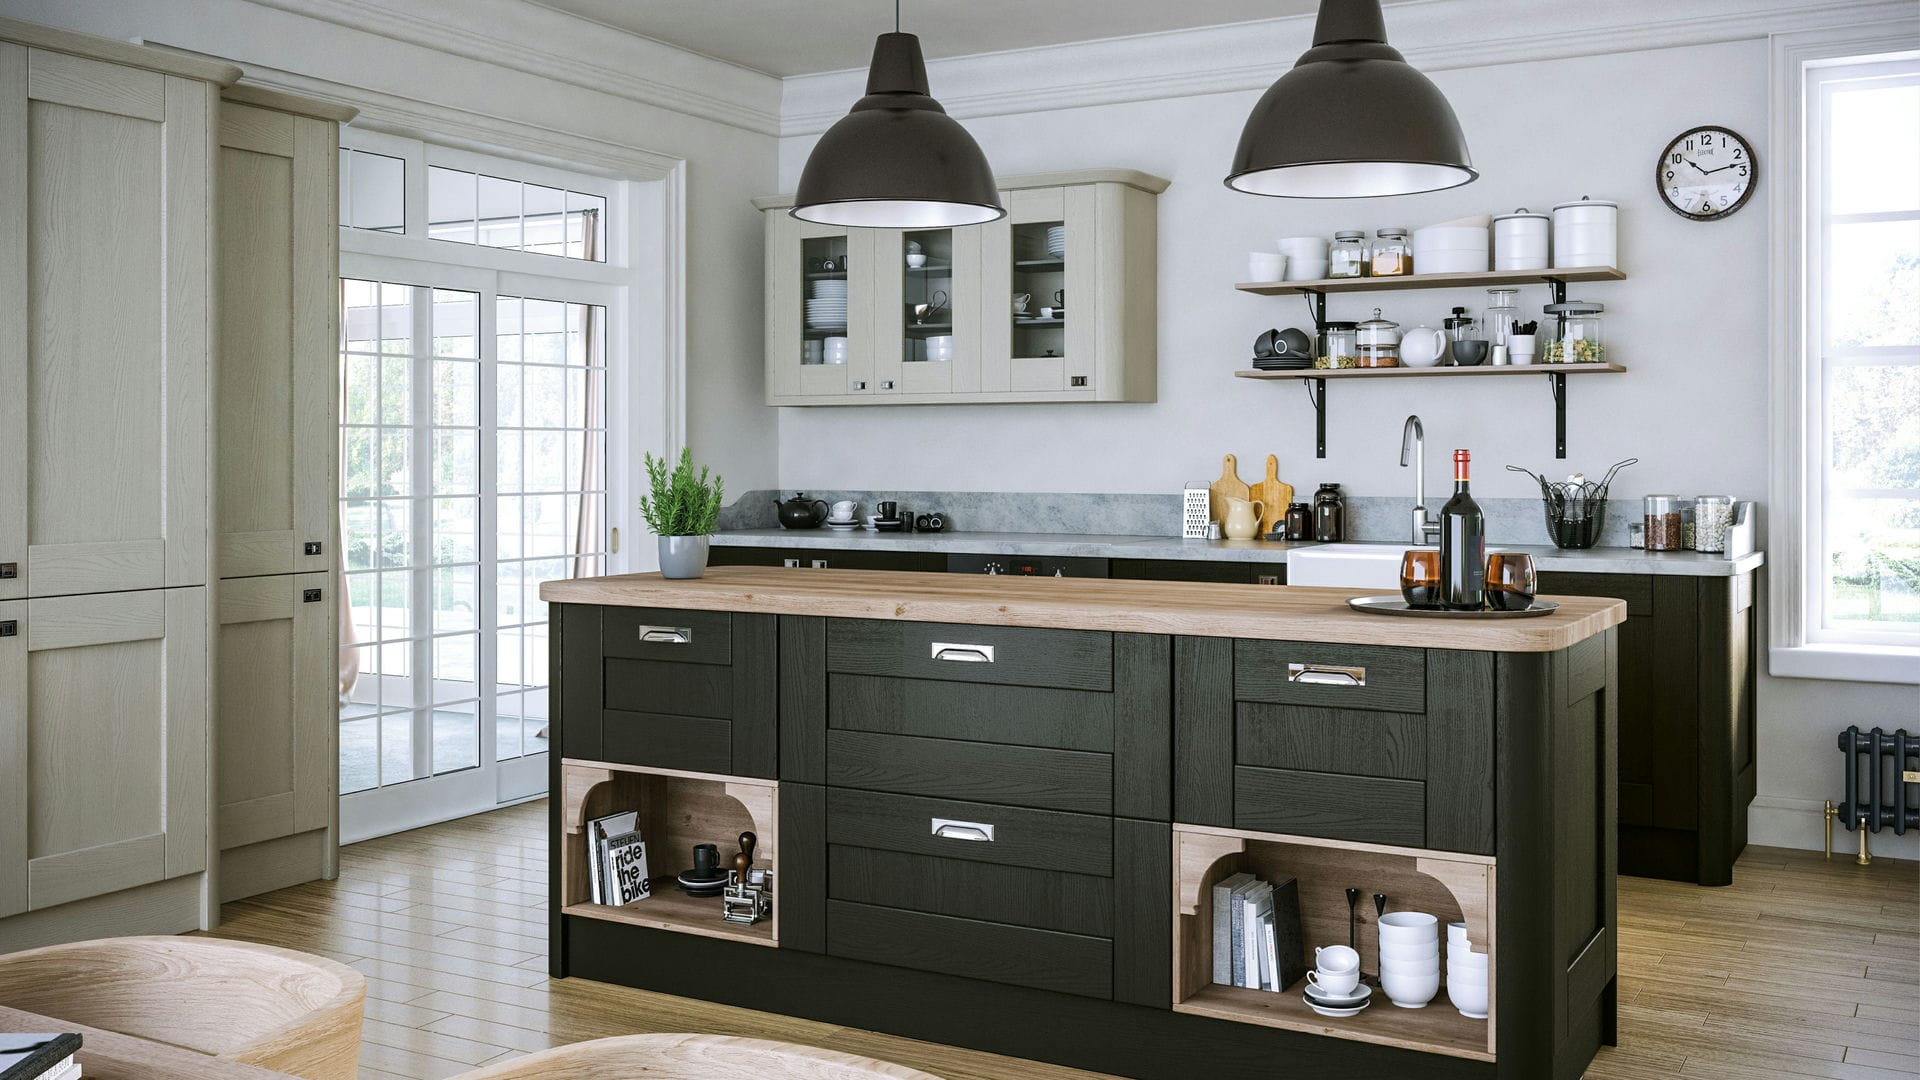 Luxury shaker graphite kitchens offering a timeless design enriched with a luxurious dark grey hue